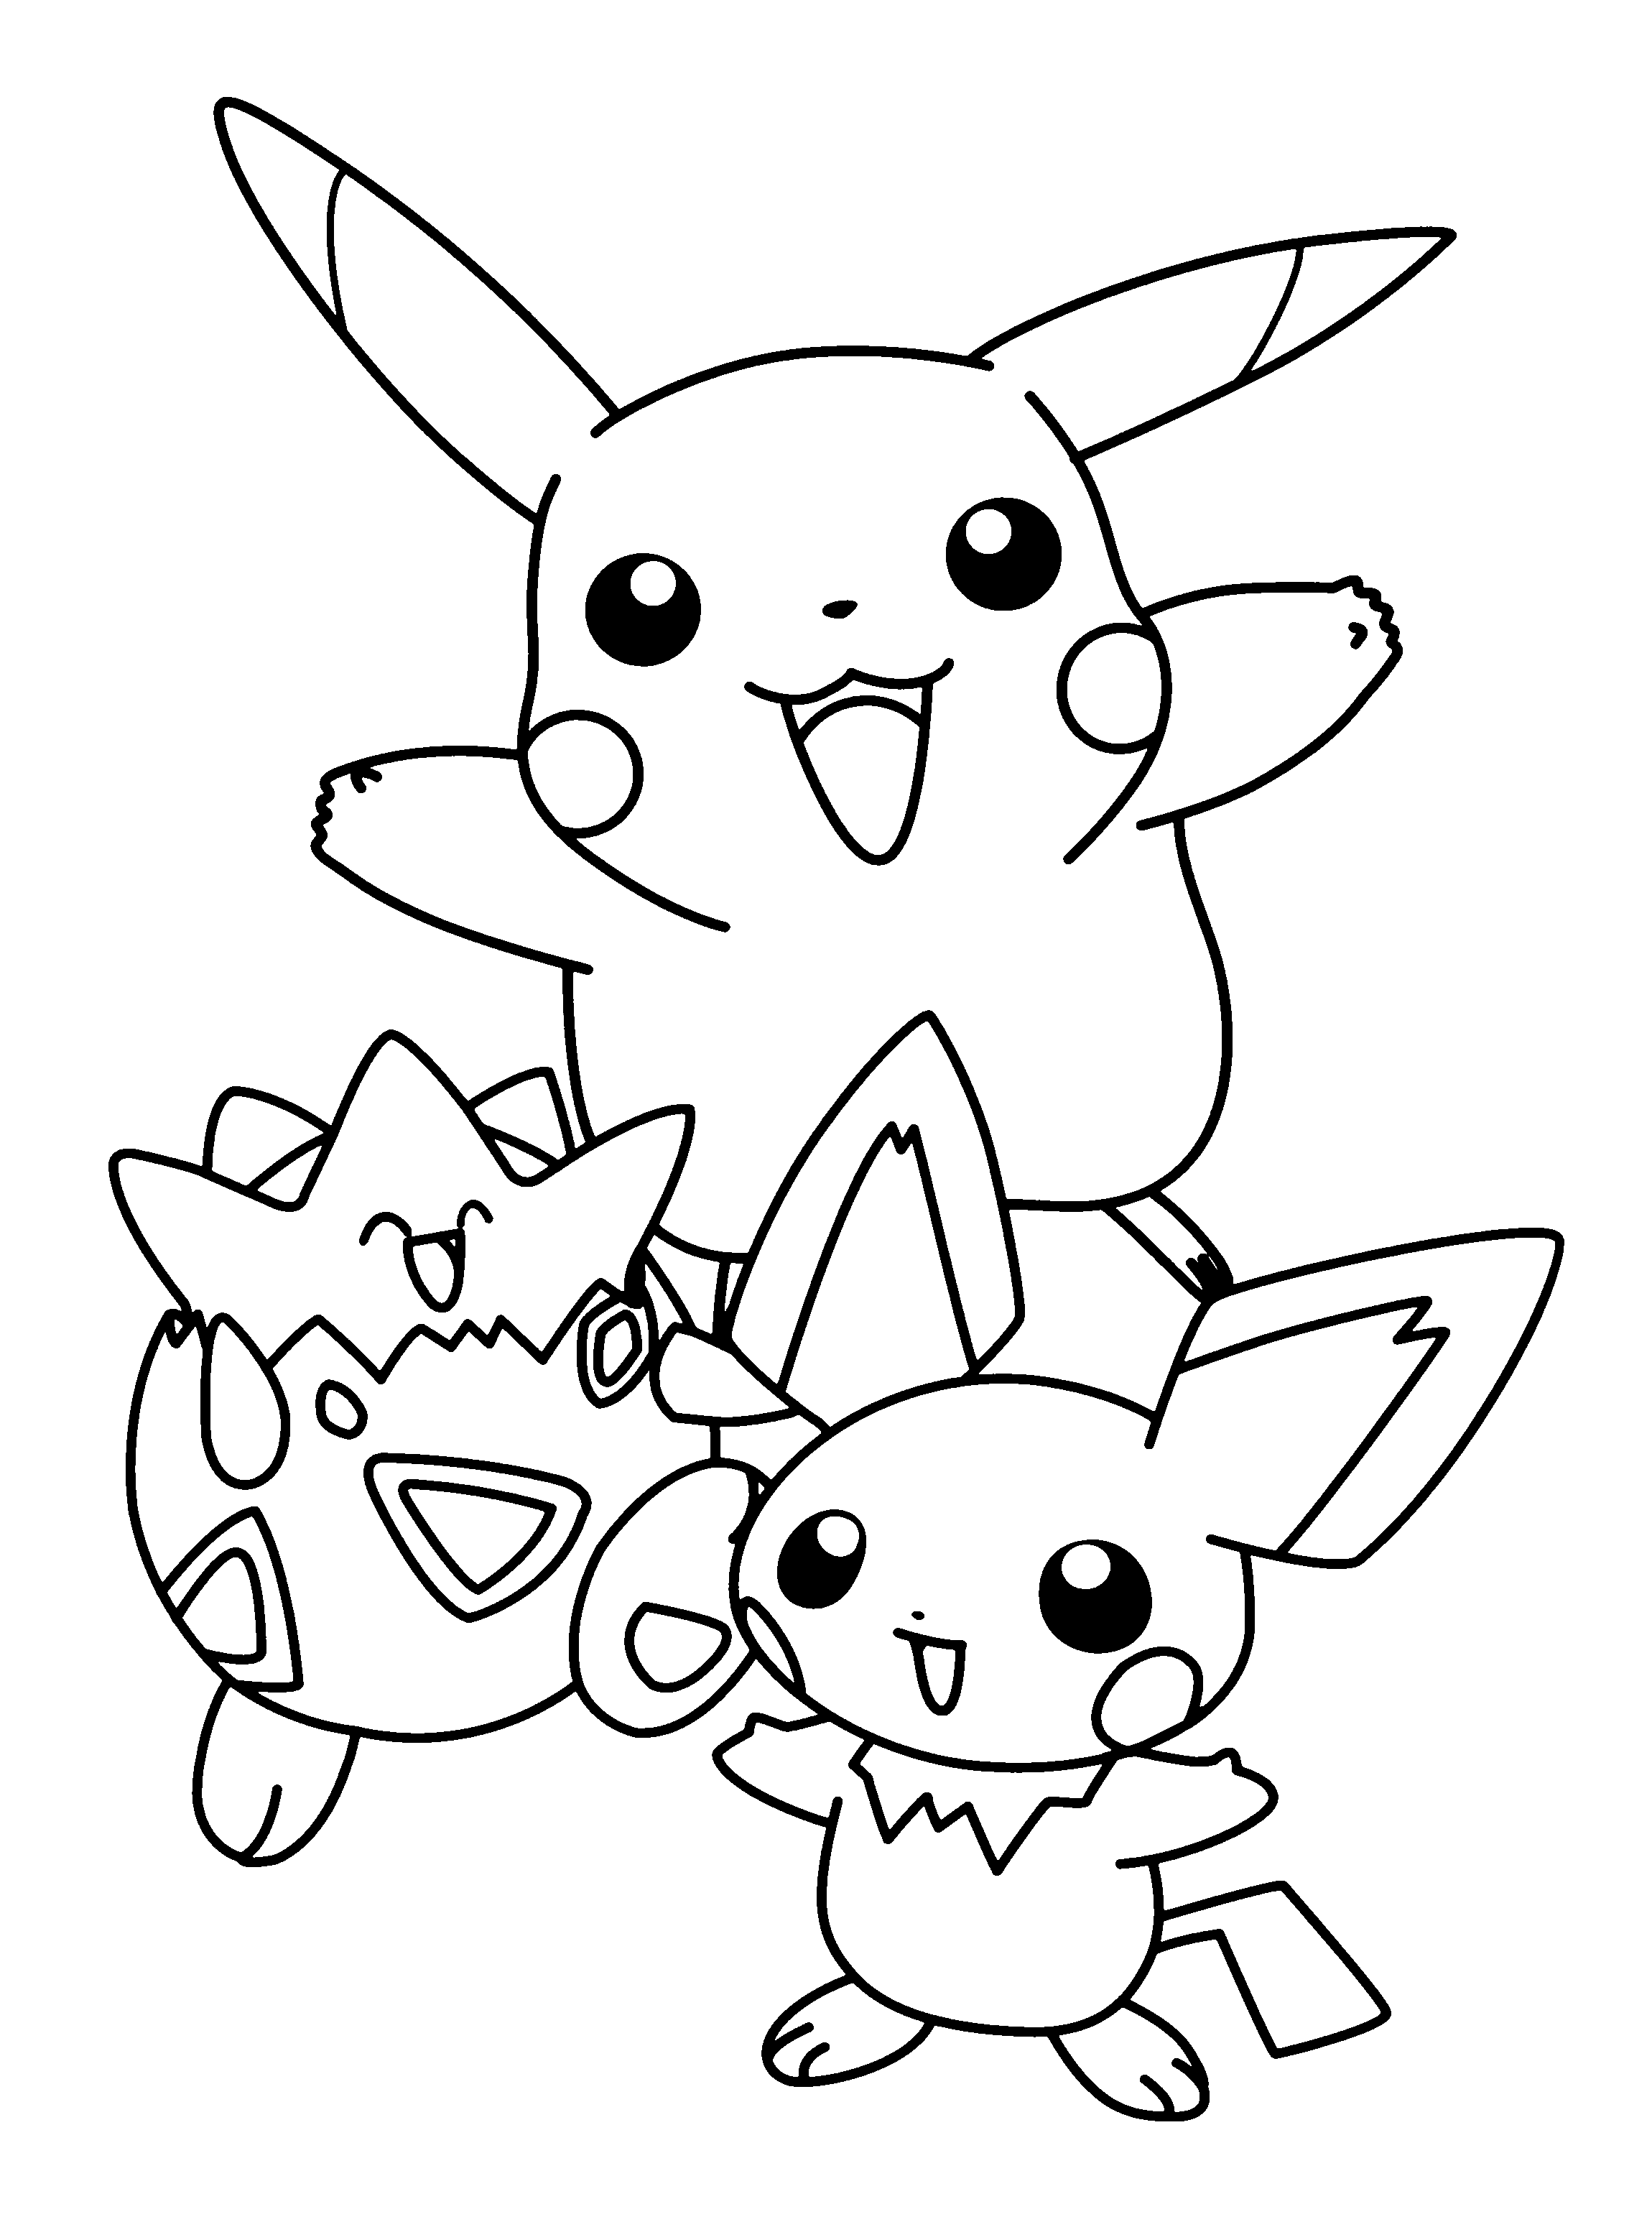 Pokemon Coloring Pages For Adults   Coloring Home